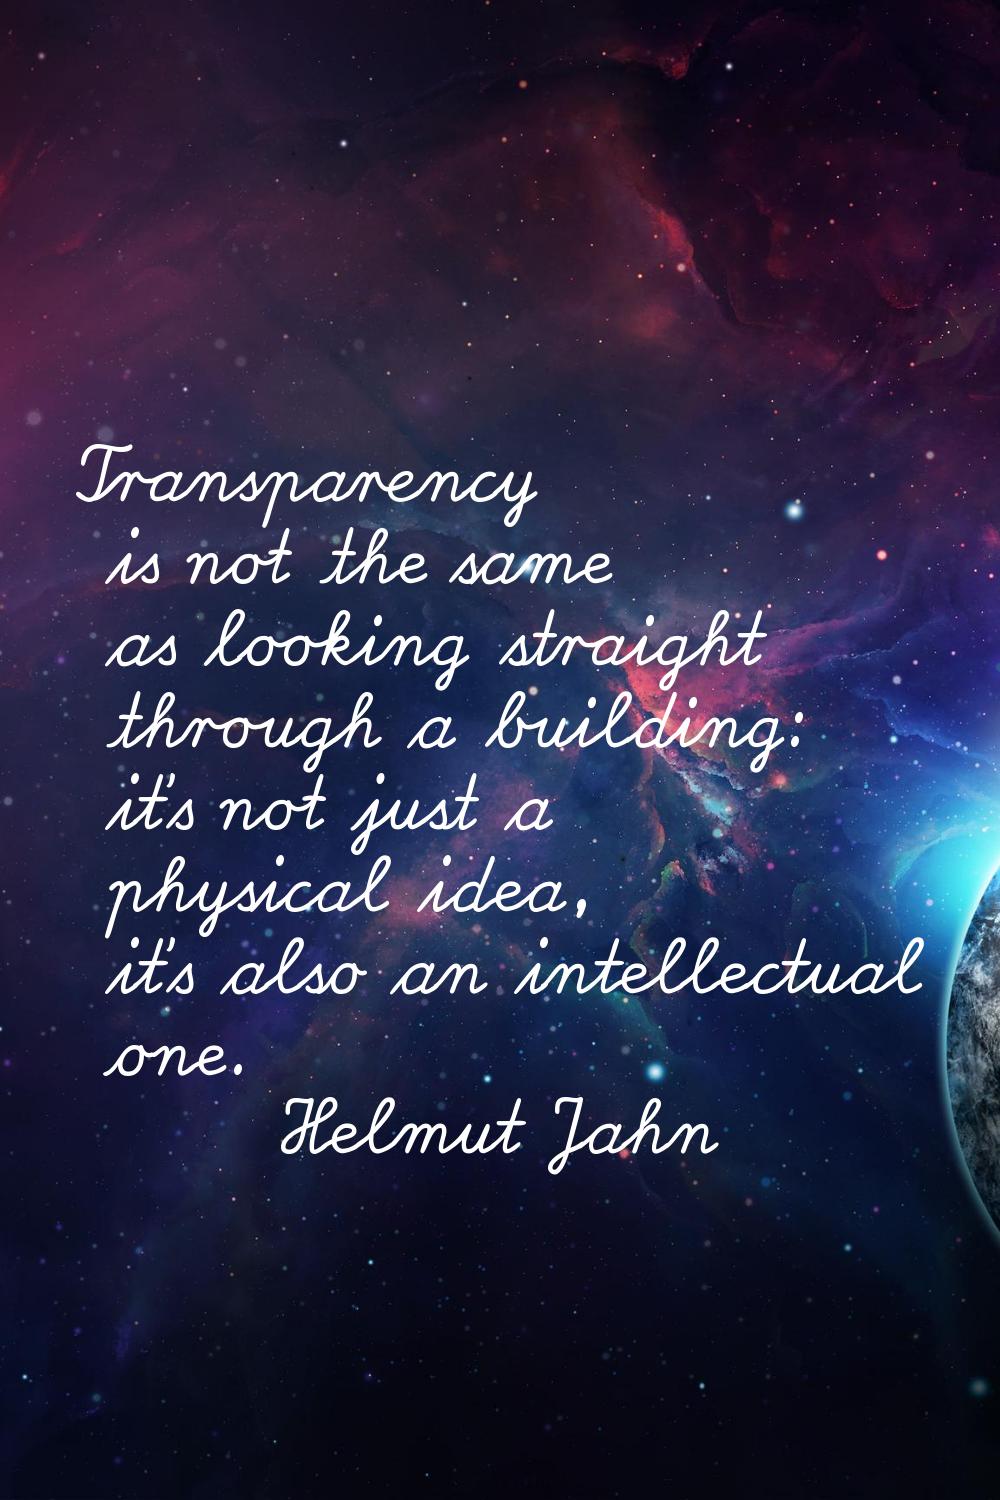 Transparency is not the same as looking straight through a building: it's not just a physical idea,